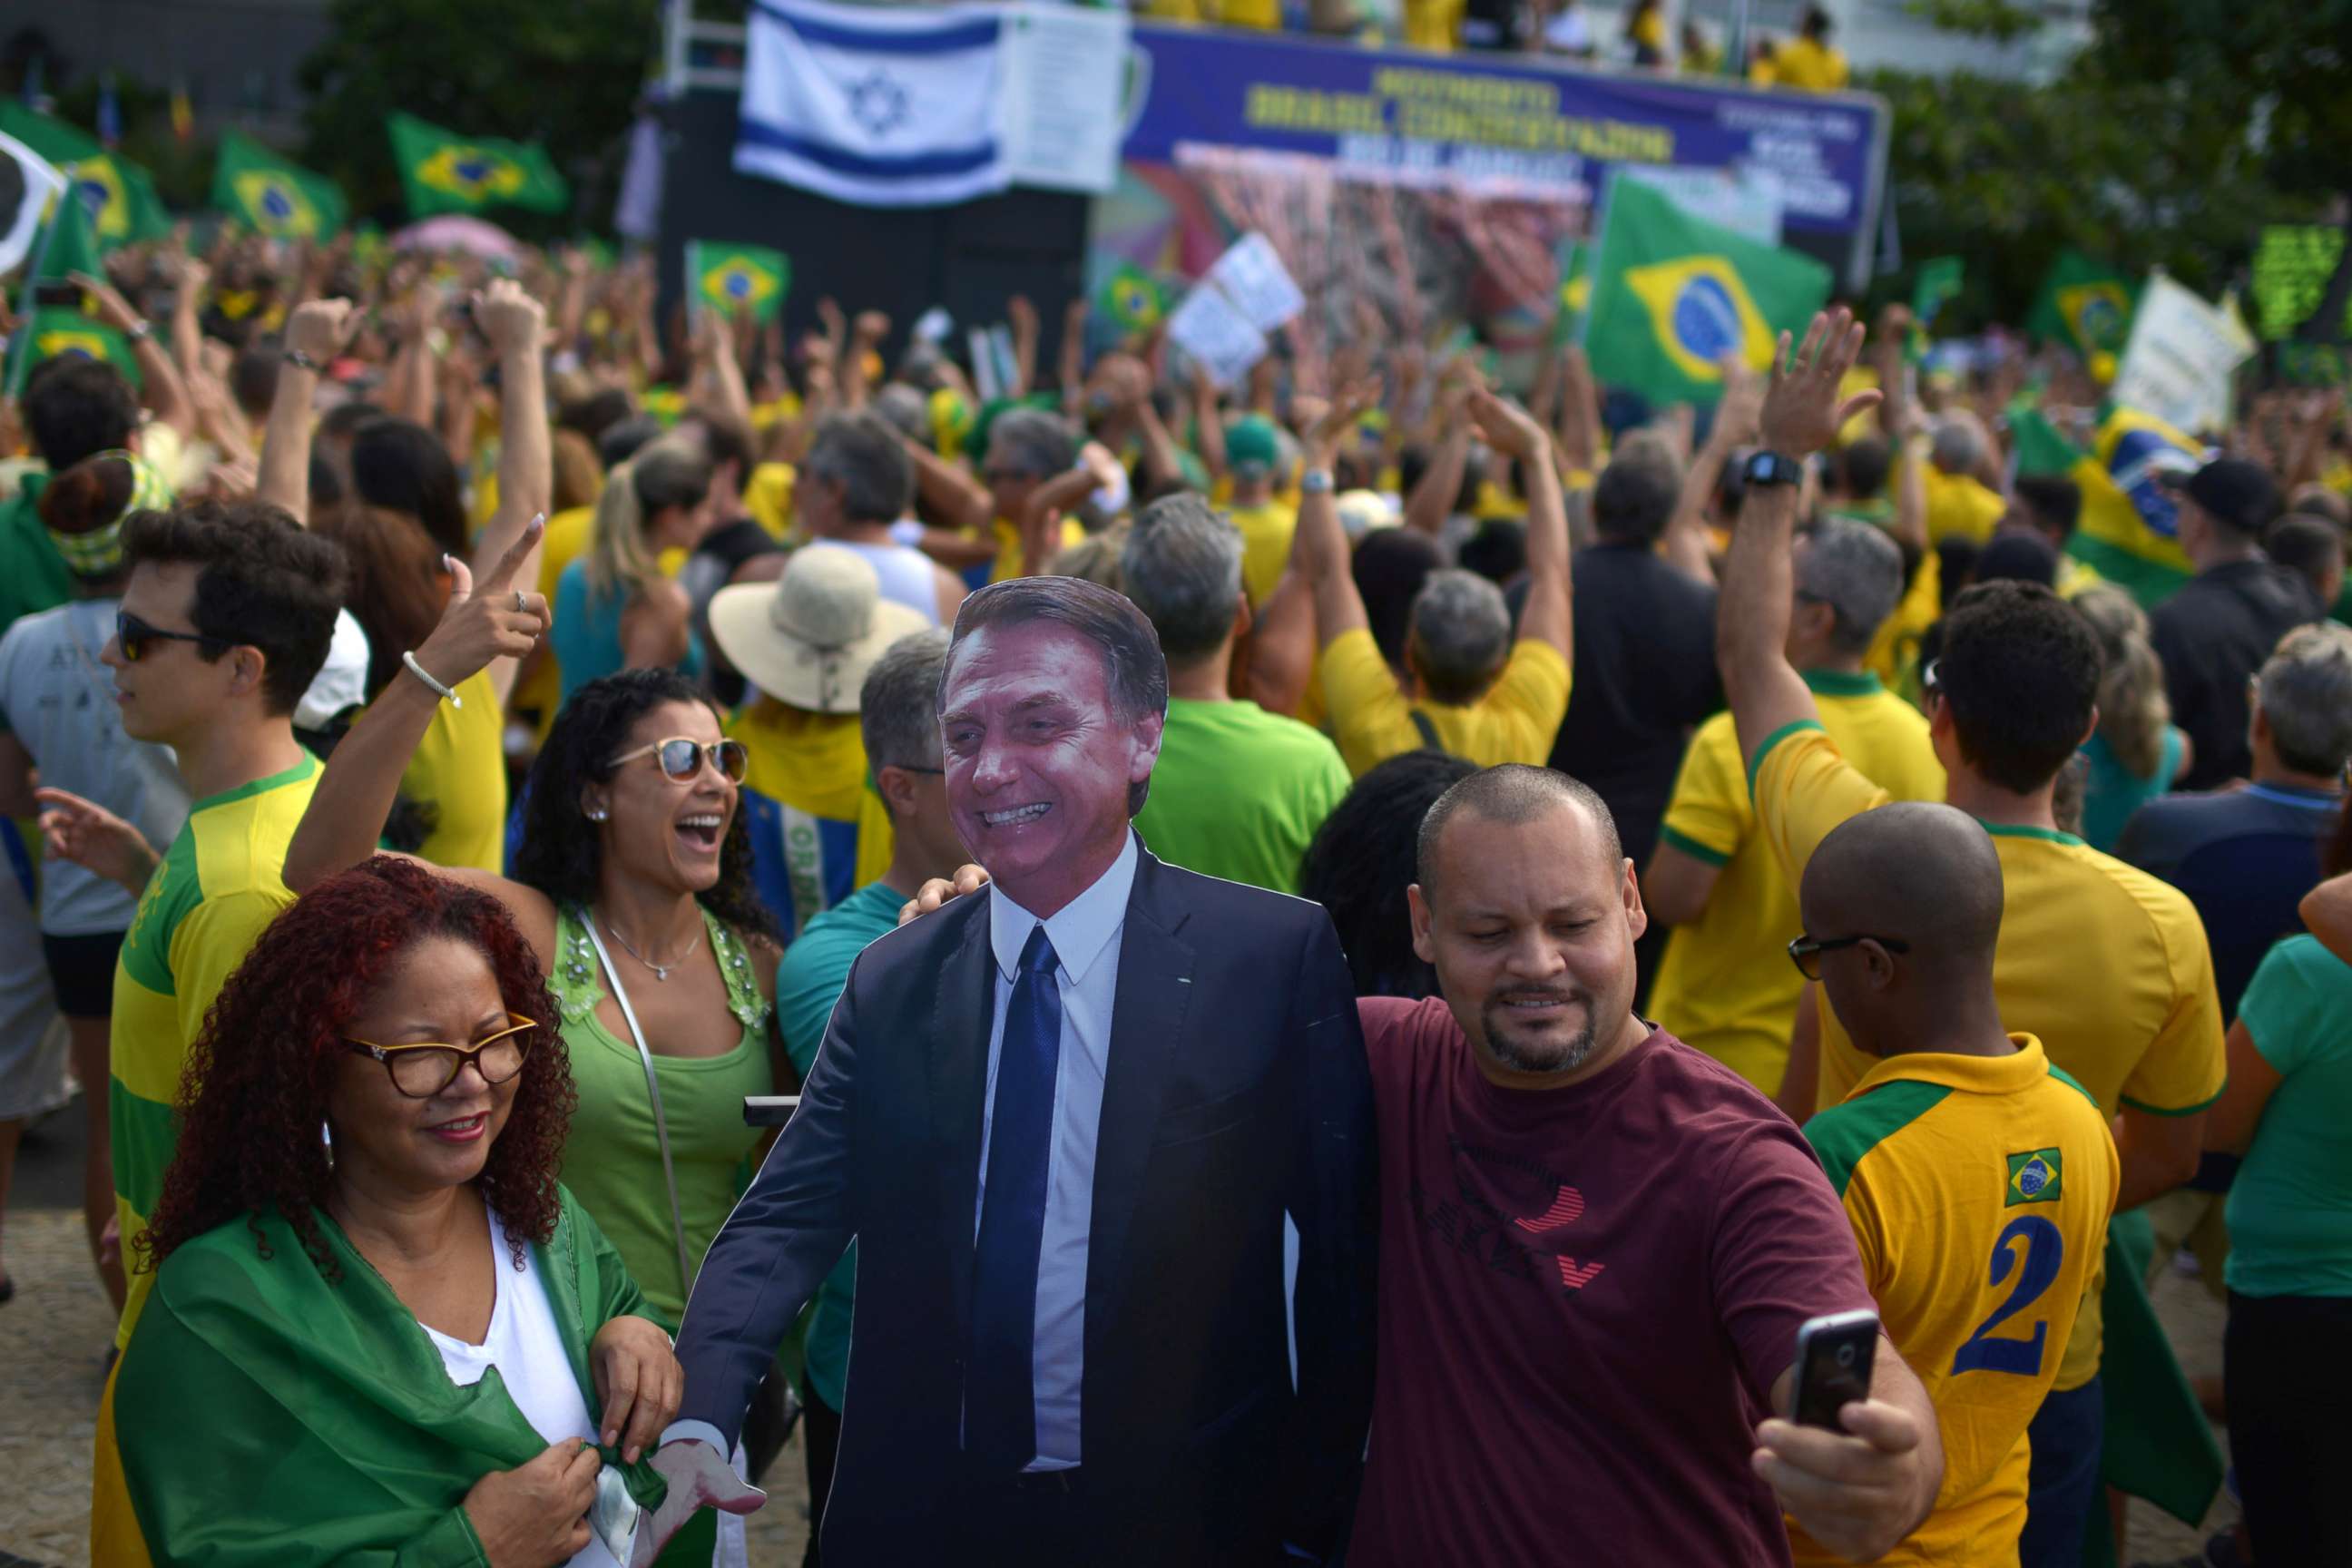 PHOTO:A man takes a selfie with a cardboard doll, depicting Brazil's President Jair Bolsonaro during a pro-government demonstration near Copacabana beach in Rio de Janeiro, Brazil, May 26, 2019.